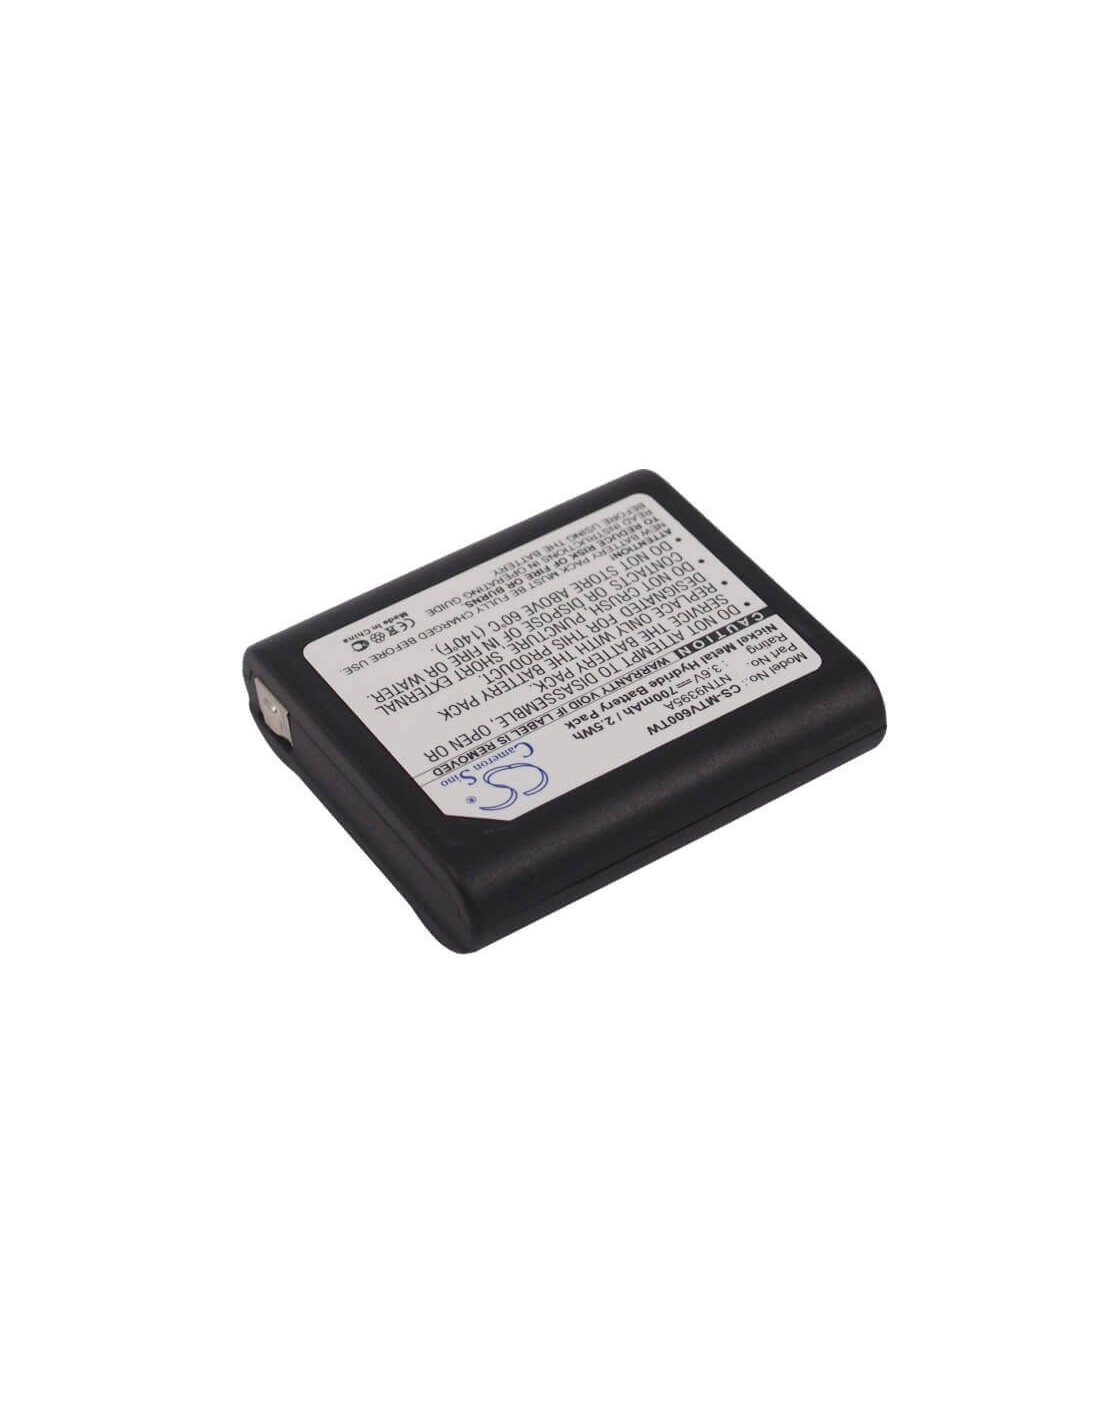 Cameron sino 700mAh Ni-MH Battery 56318 NTN9395A Replacement for Motorola Talkabout T6000 T6200 T6210 T6220 T6250 T6400 T6500 T6500R 